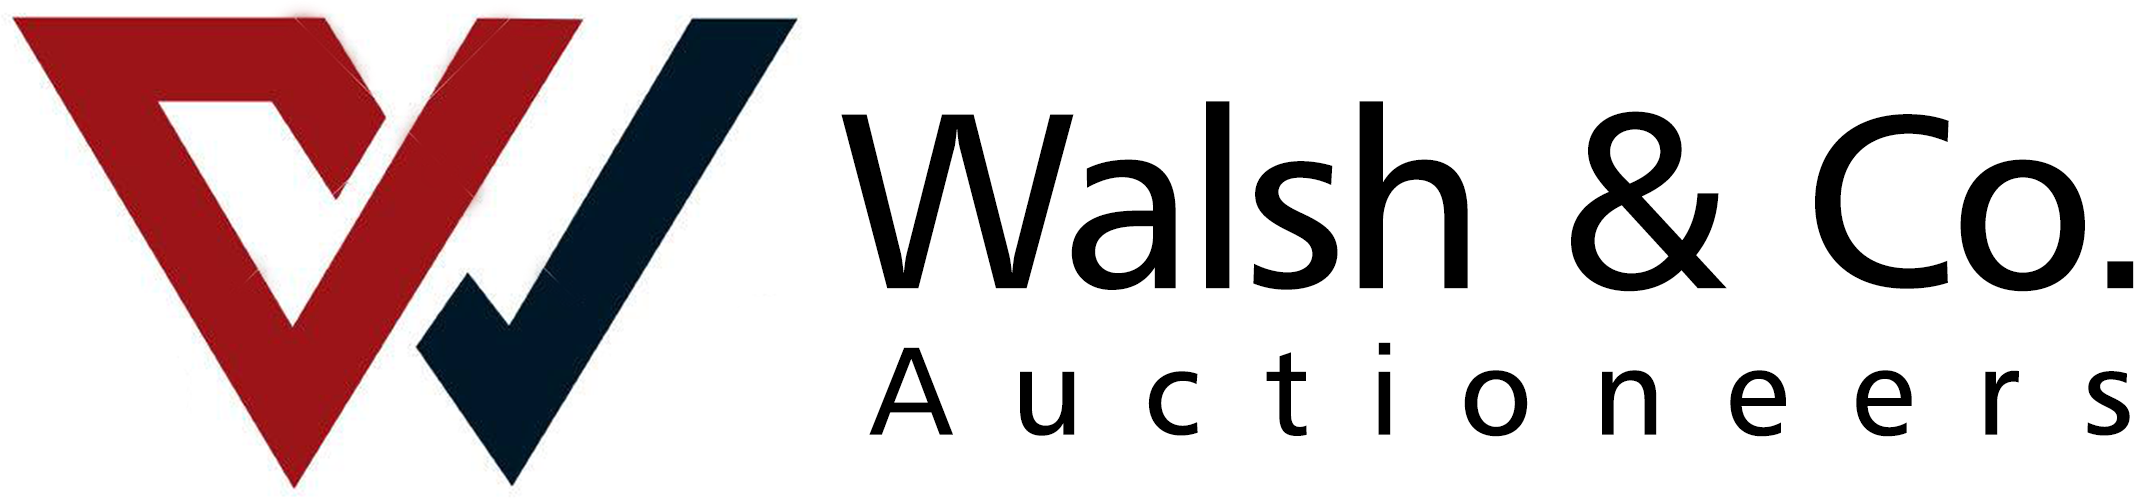 Walsh and Co Auctioneers